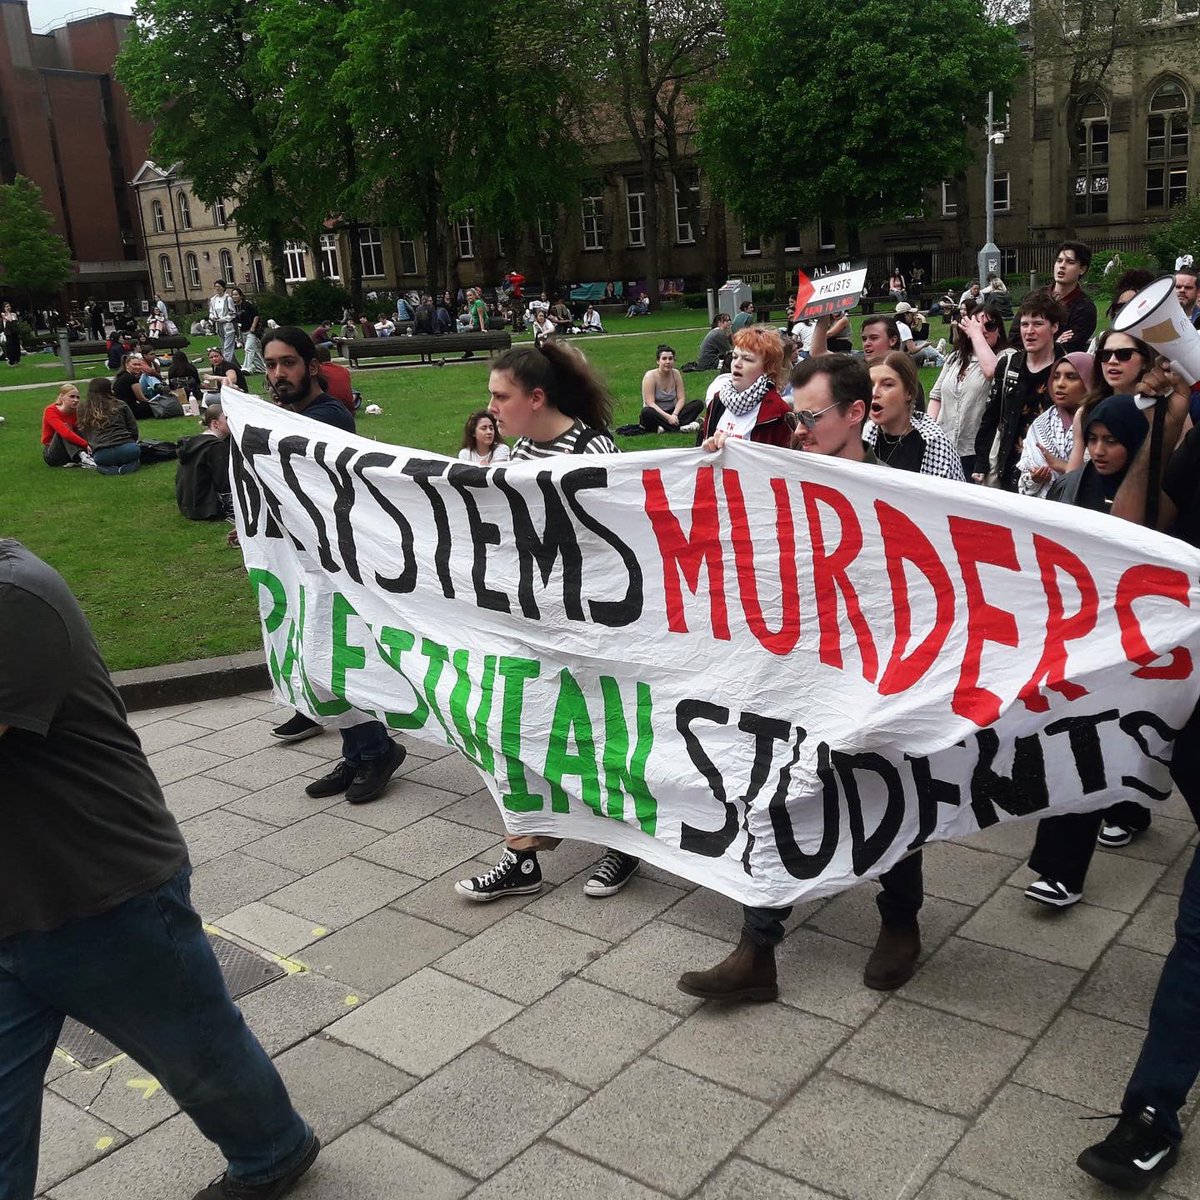 Pics at University of Manchester (UoM): Demo To Stop Arming Israel - Hands Off Rafah! demand an end to any active participation in the ethnic cleansing & murder of Palestinians.Help us break the cycle of complicity & demand UoM cuts its ties with the Zionist regime